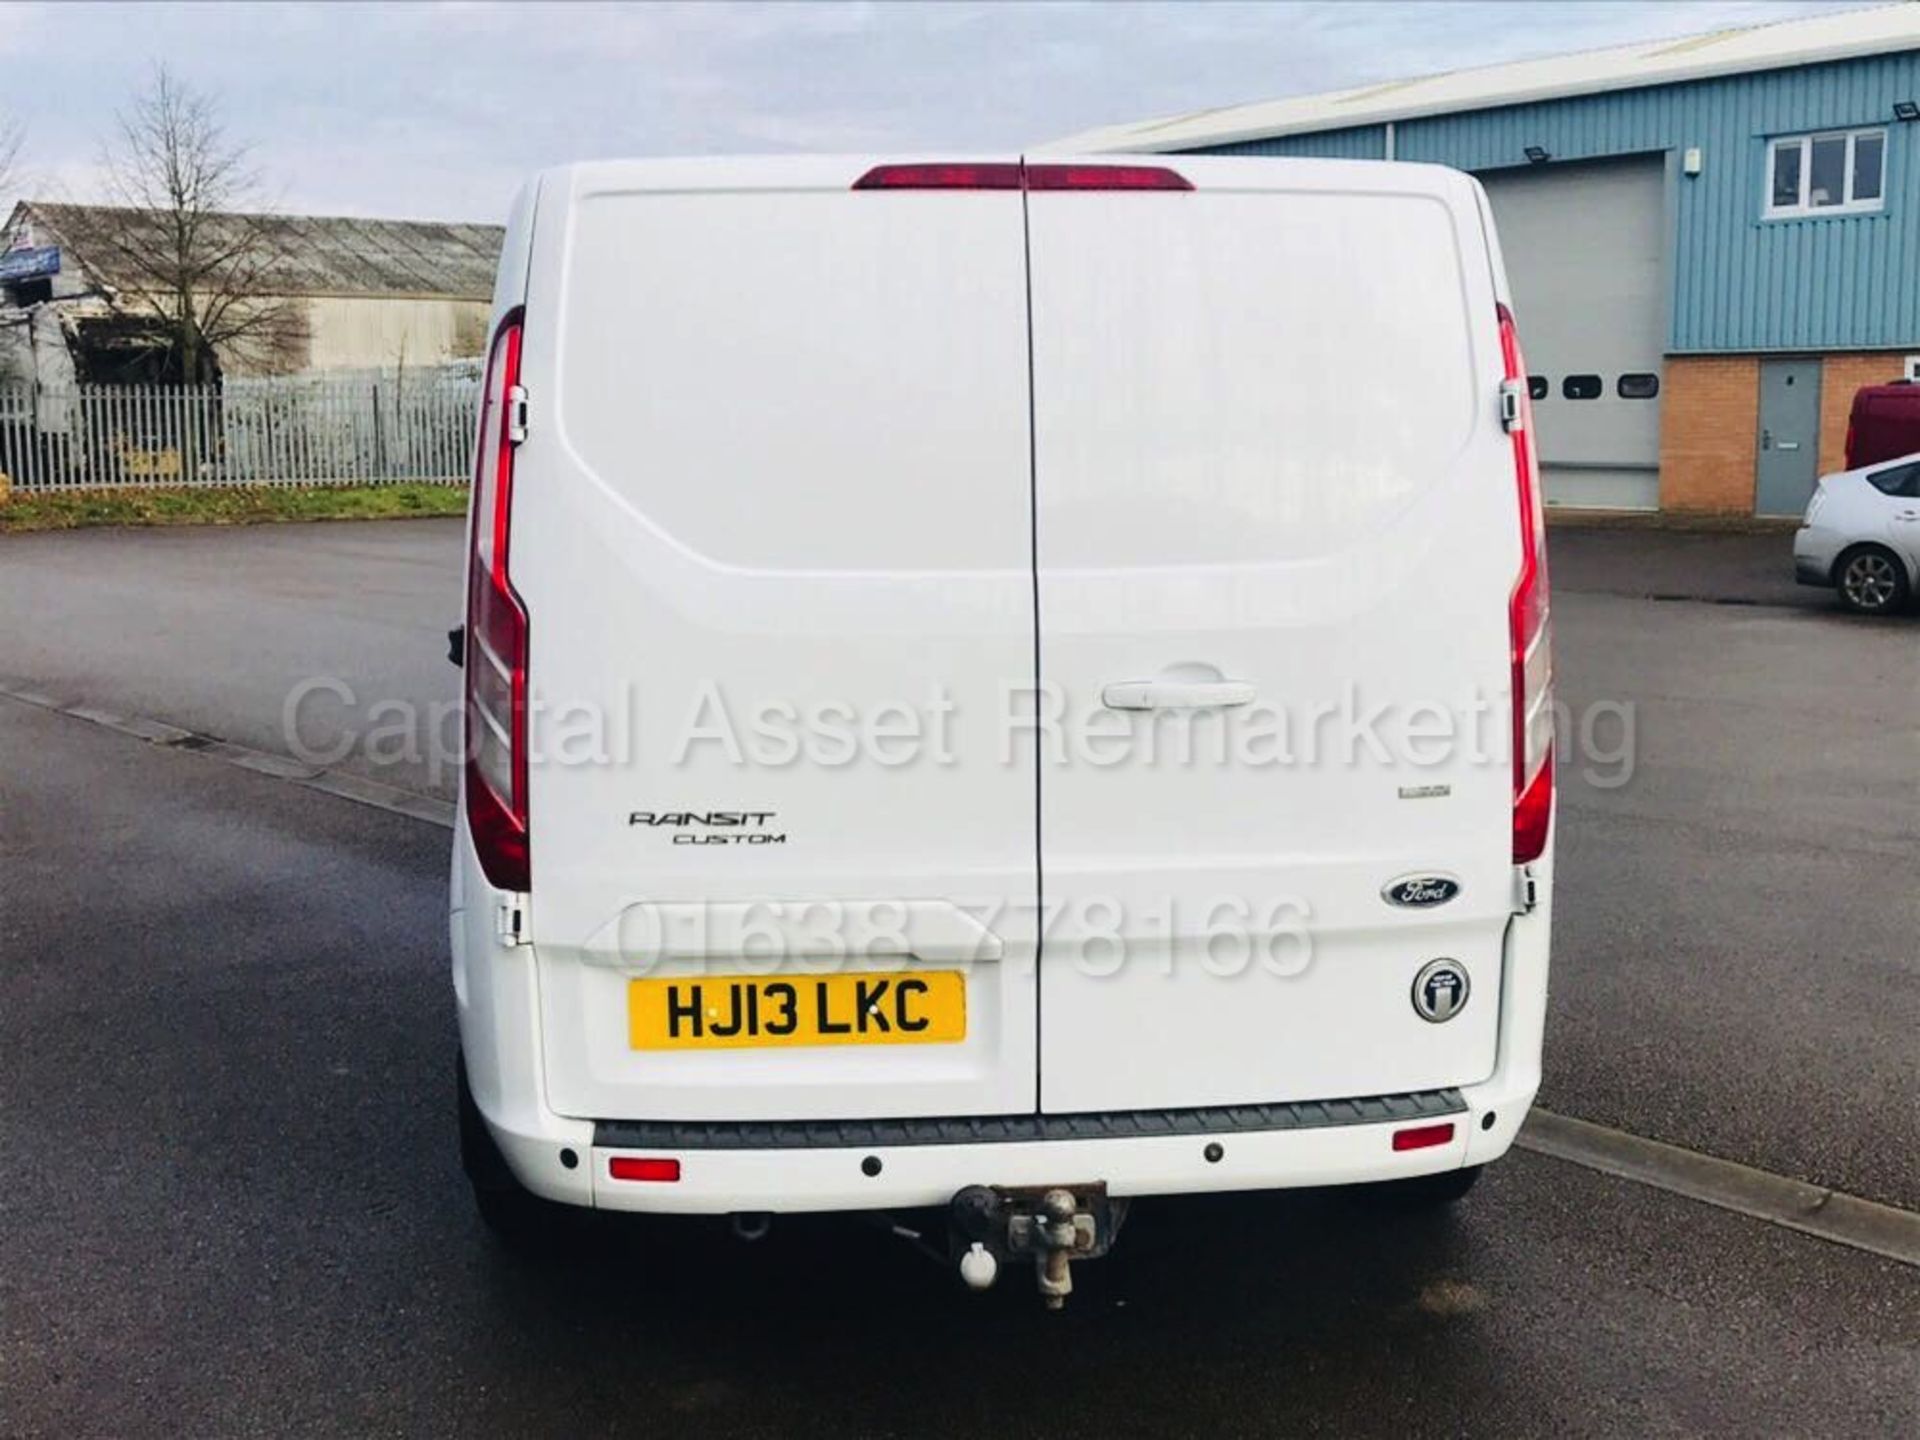 (On Sale) FORD TRANSIT CUSTOM 'LIMITED SPEC' (2013 - NEW MODEL) '2.2 TDCI - 6 SPEED' *A/C* (NO VAT) - Image 6 of 32